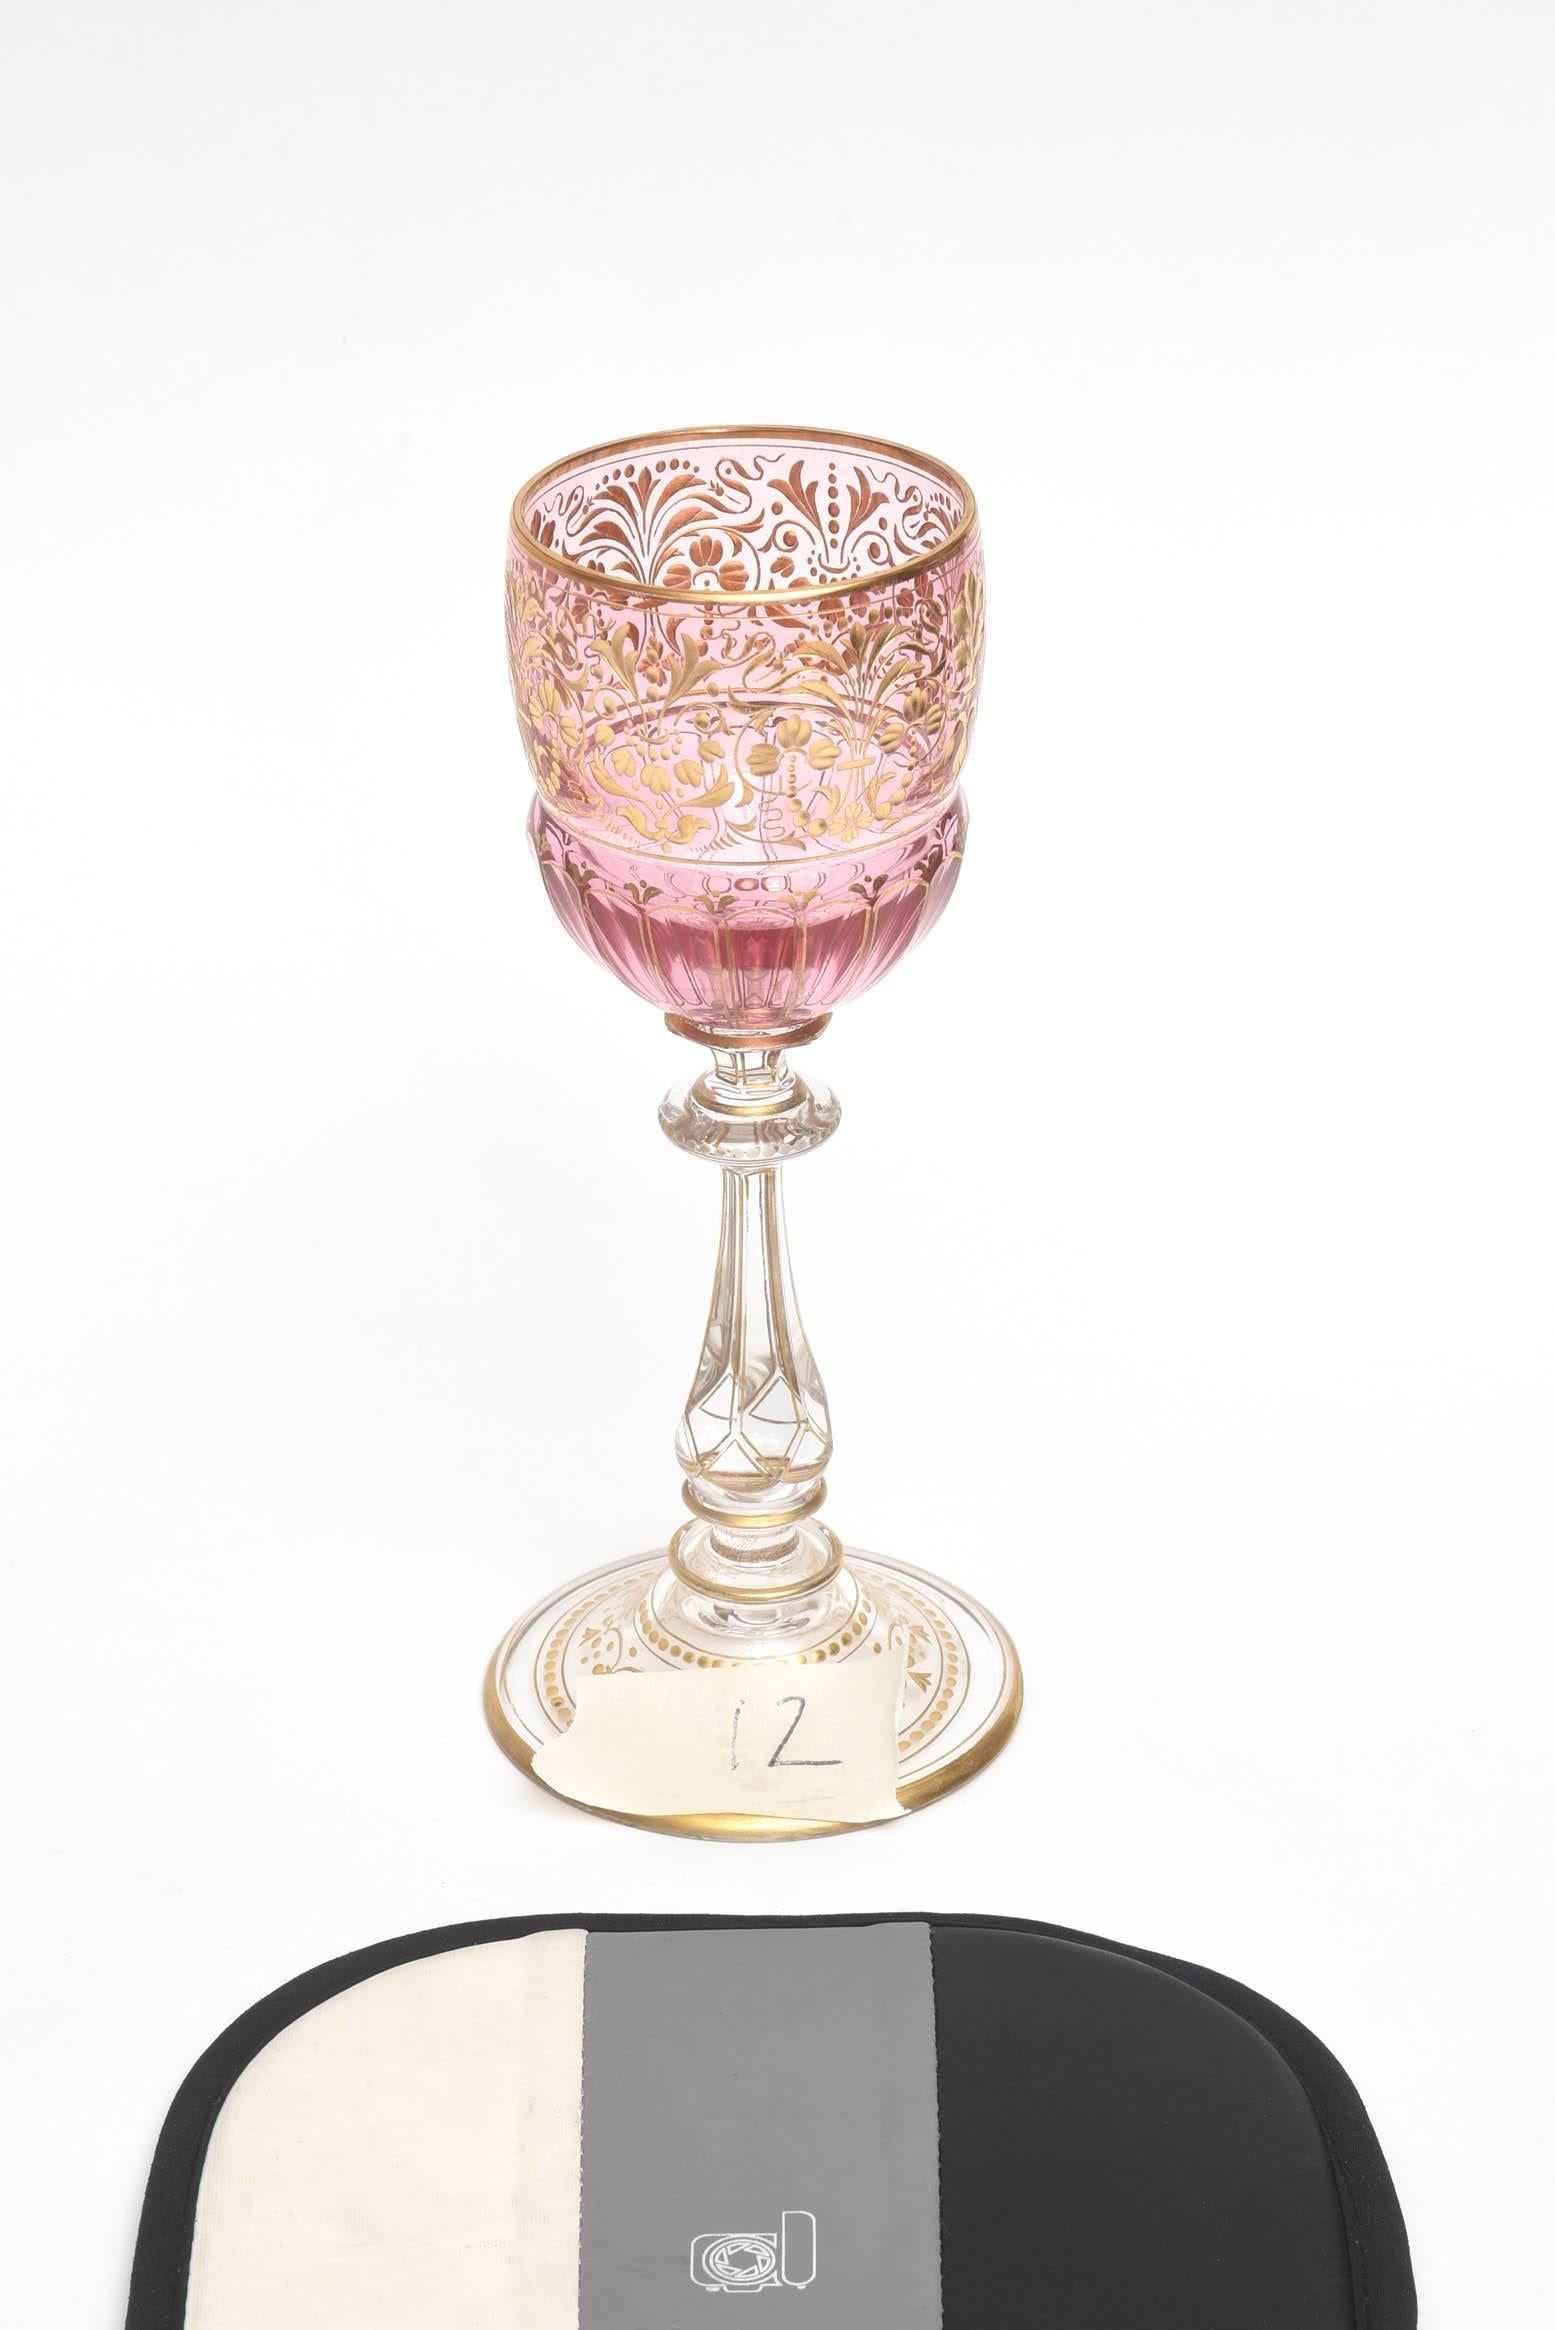 A delightful set of 8 last quarter of the 19th century goblets that have been blown, cut and painstakingly gilded. A nice cut knob stem makes them a joy to hold and the color is just vibrant enough and would mix and match well in with all your fine